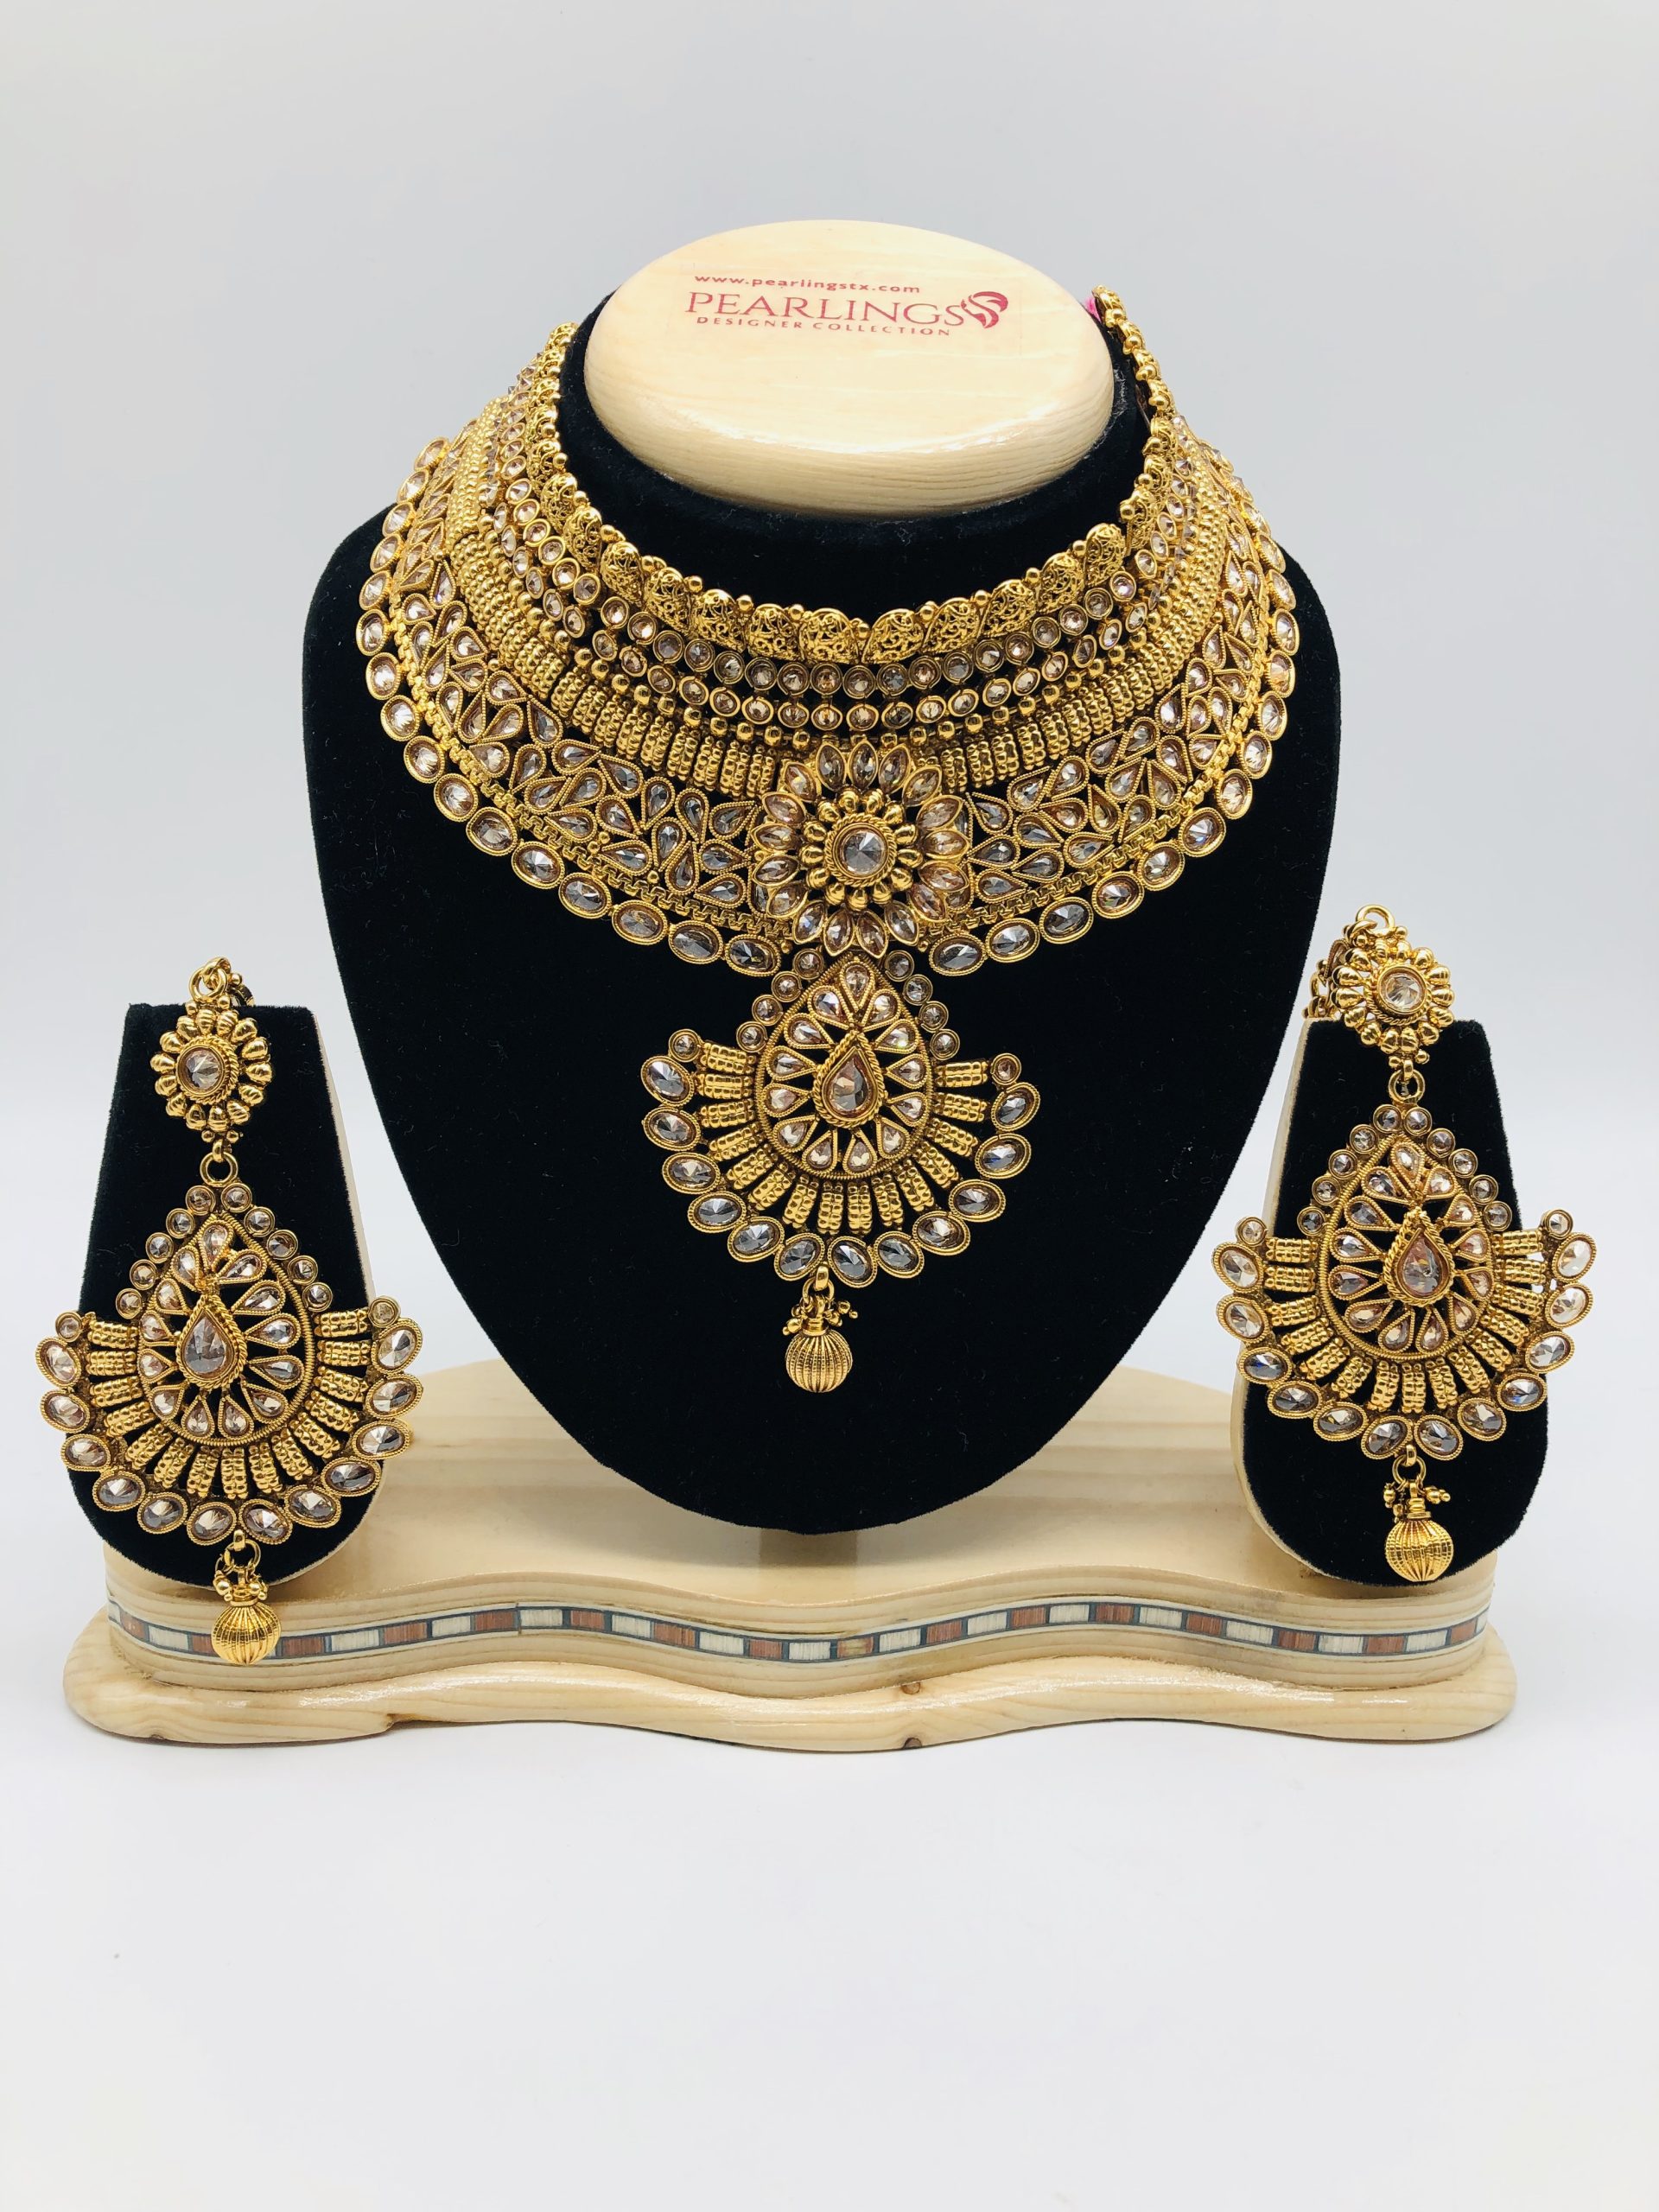 Details about   SOUTH INDIAN CHOKER JEWELRY SET GOLD PLATED BRIDAL KUNDAN CZ NECKLACE EARRINGS 